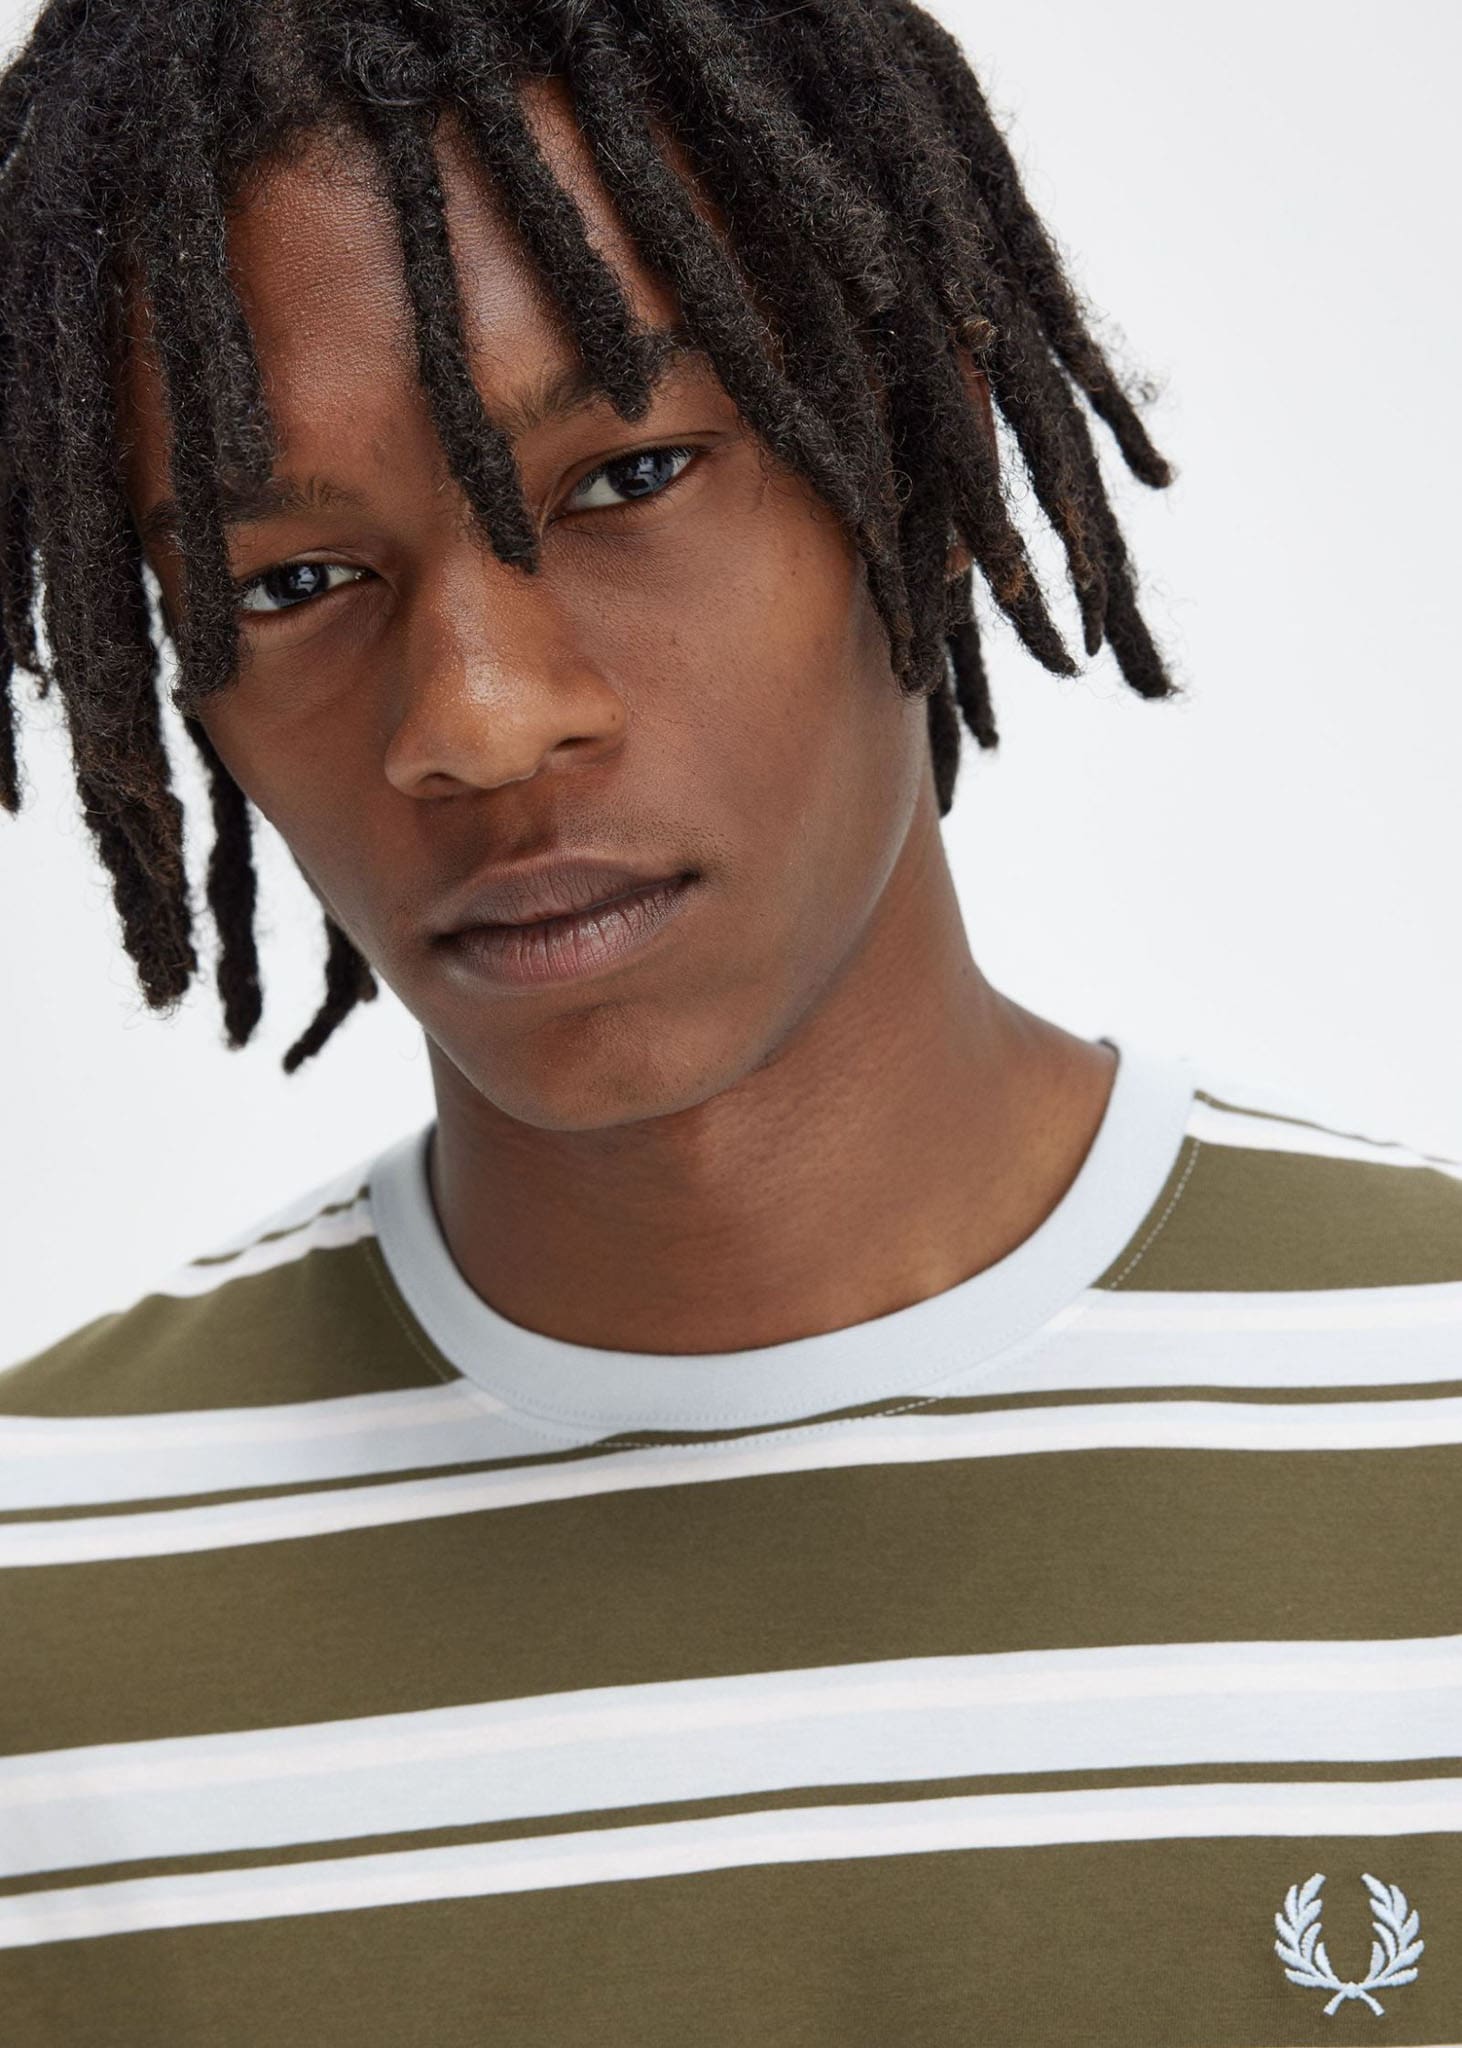 Fred Perry T-shirts  Stripe t-shirt - ungre snwh lgice 